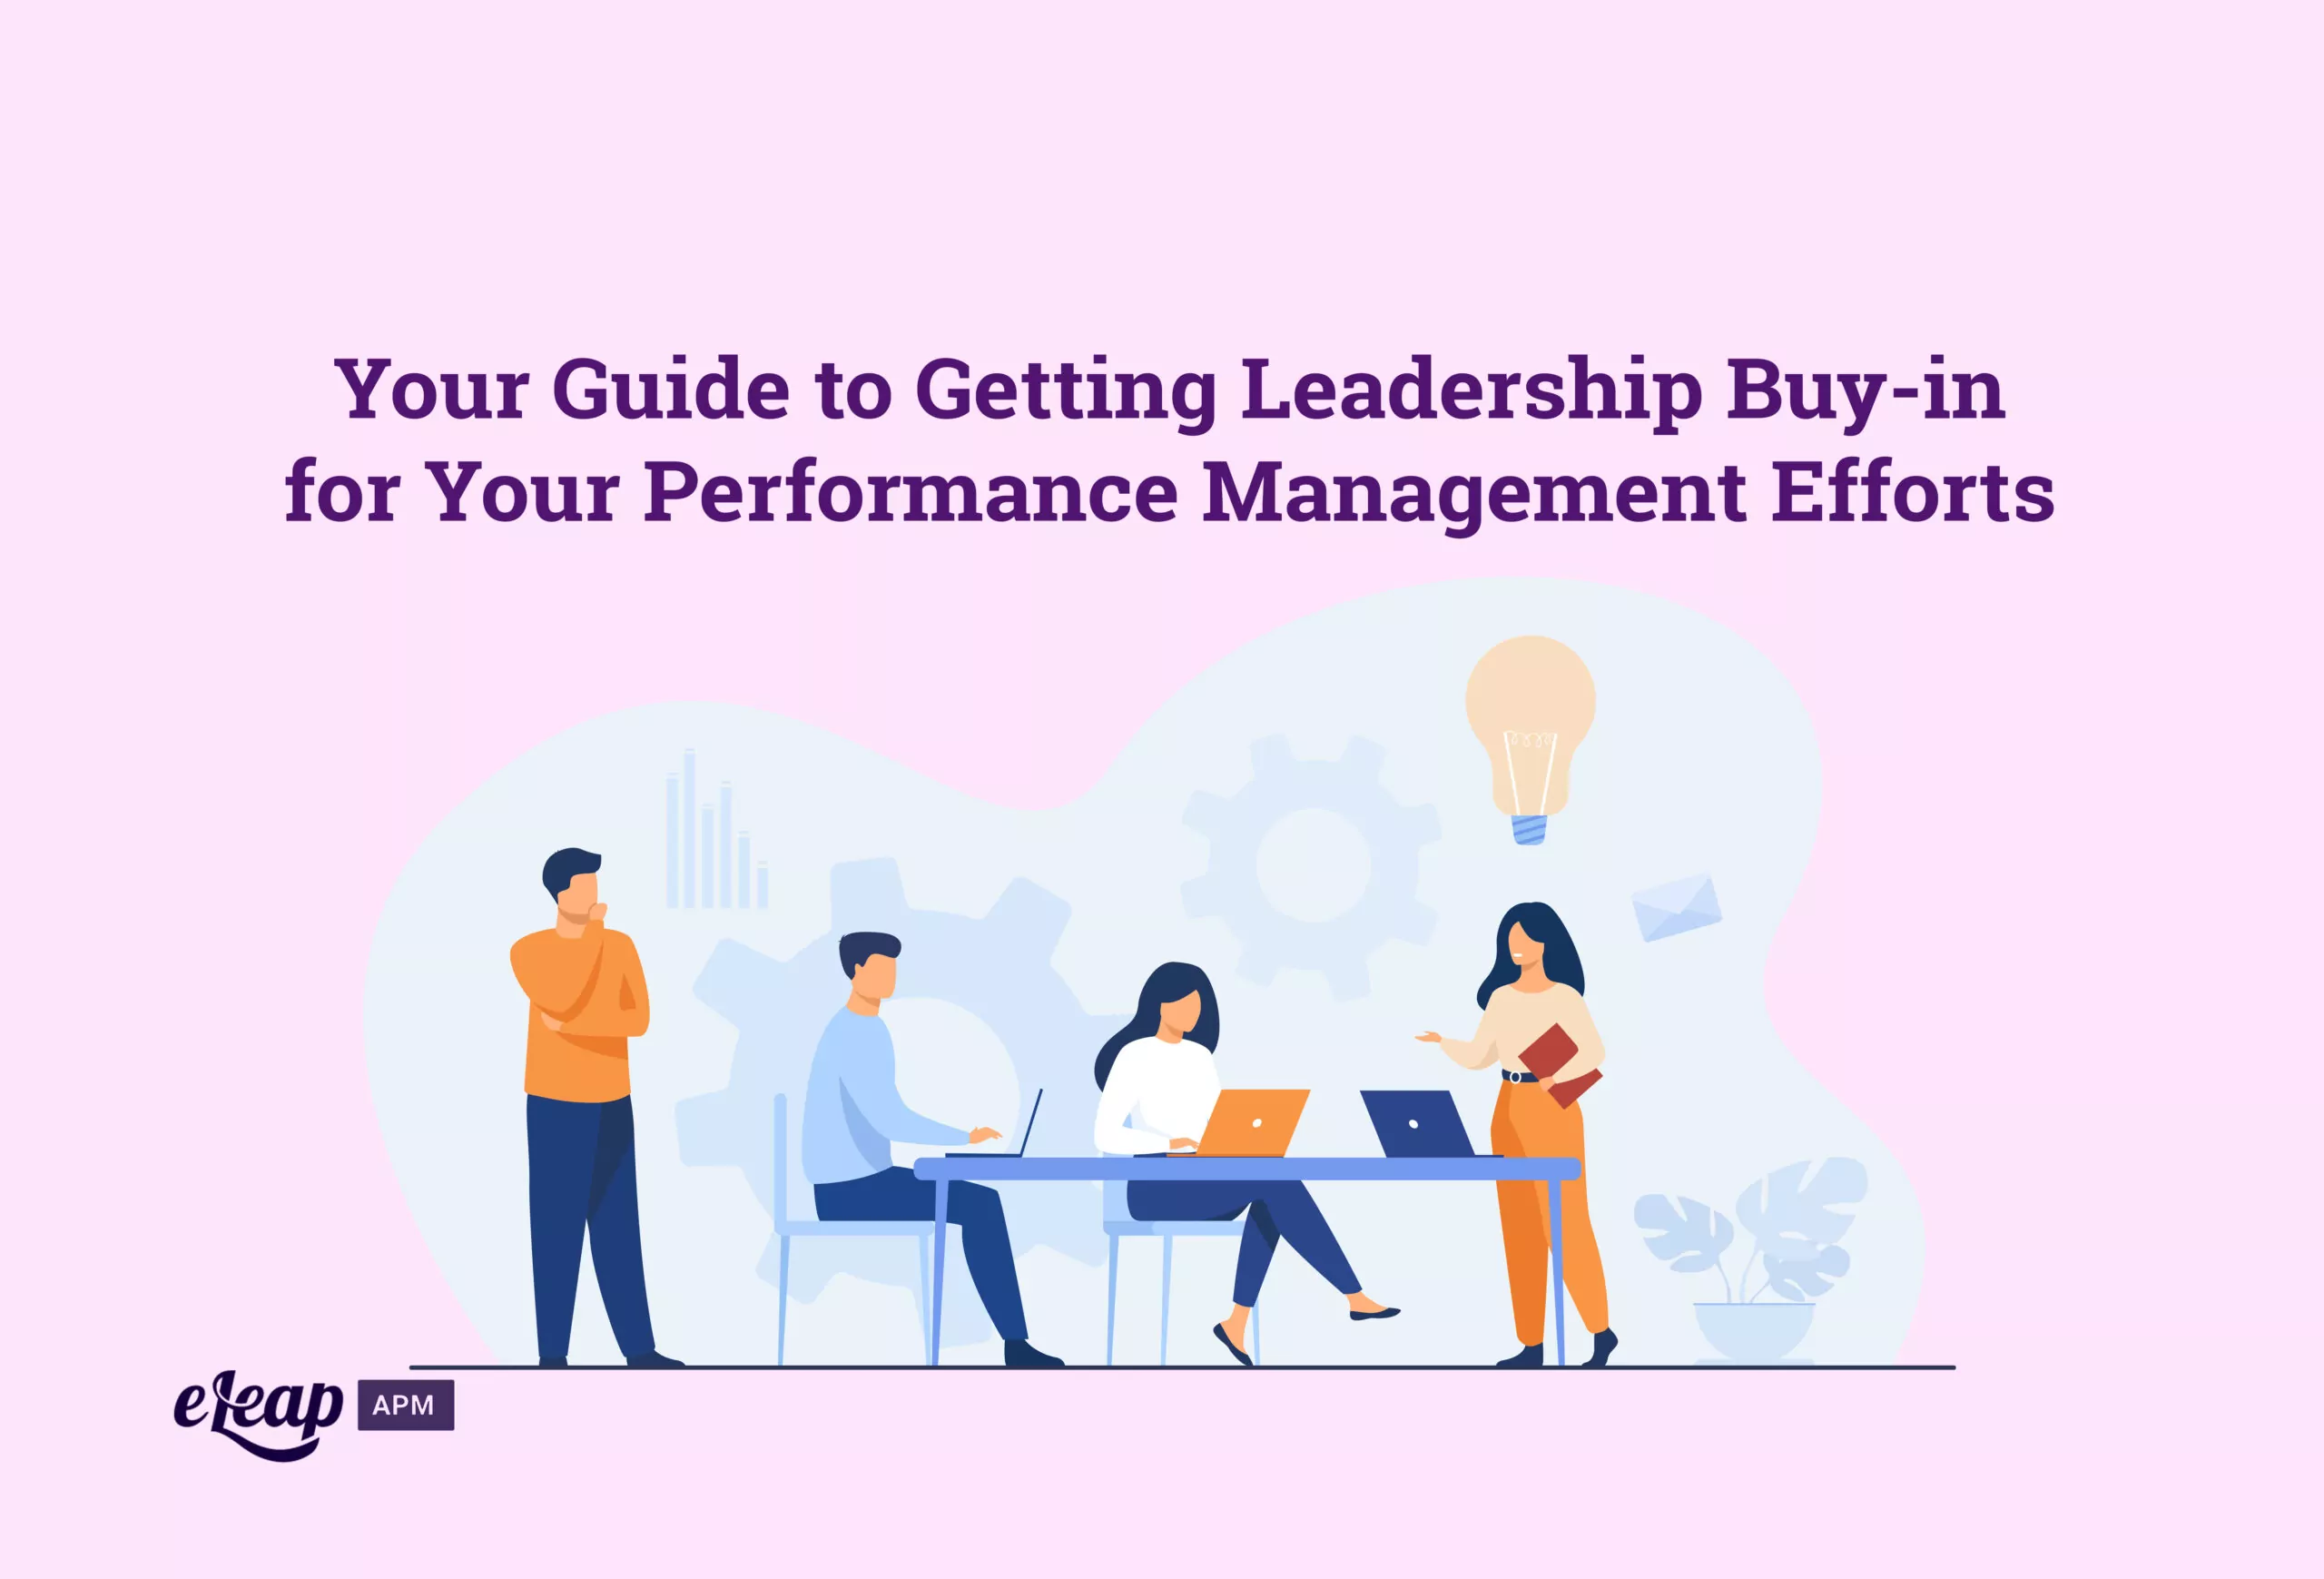 Your Guide to Getting Leadership Buy-in for Your Performance Management Efforts